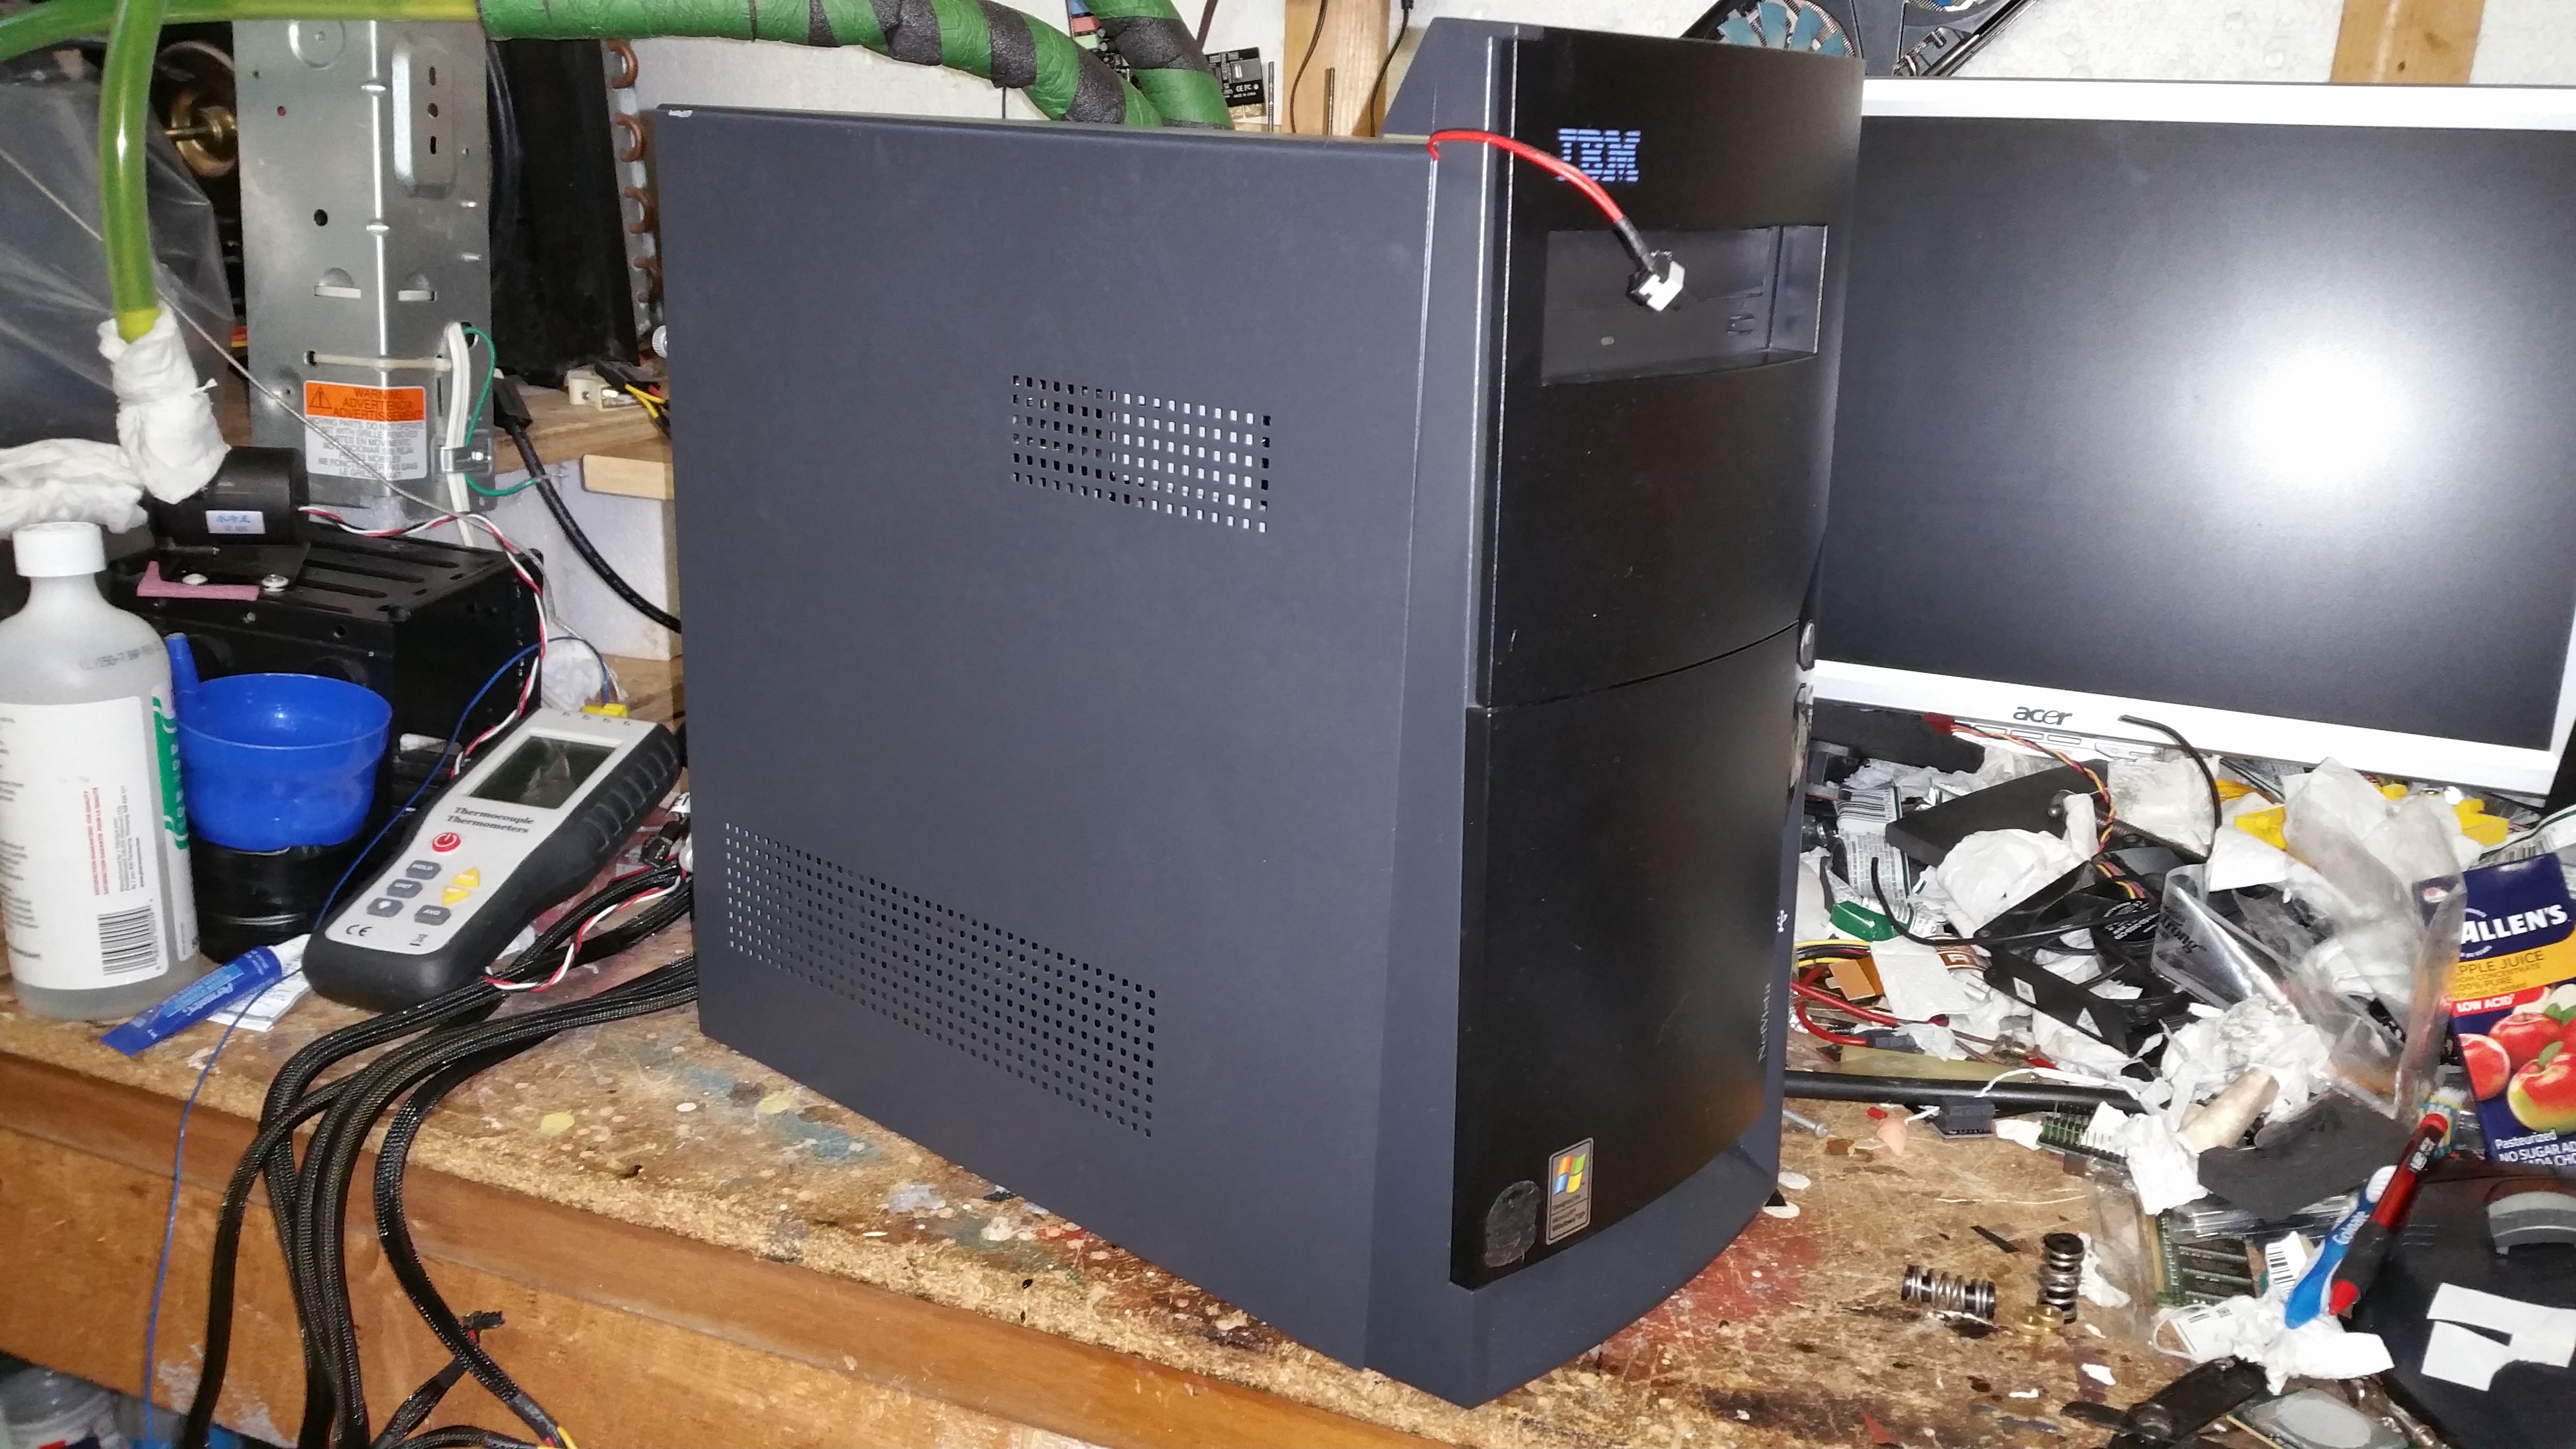 Your Retro Gaming Pc Builds 1995 05 Techpowerup Forums